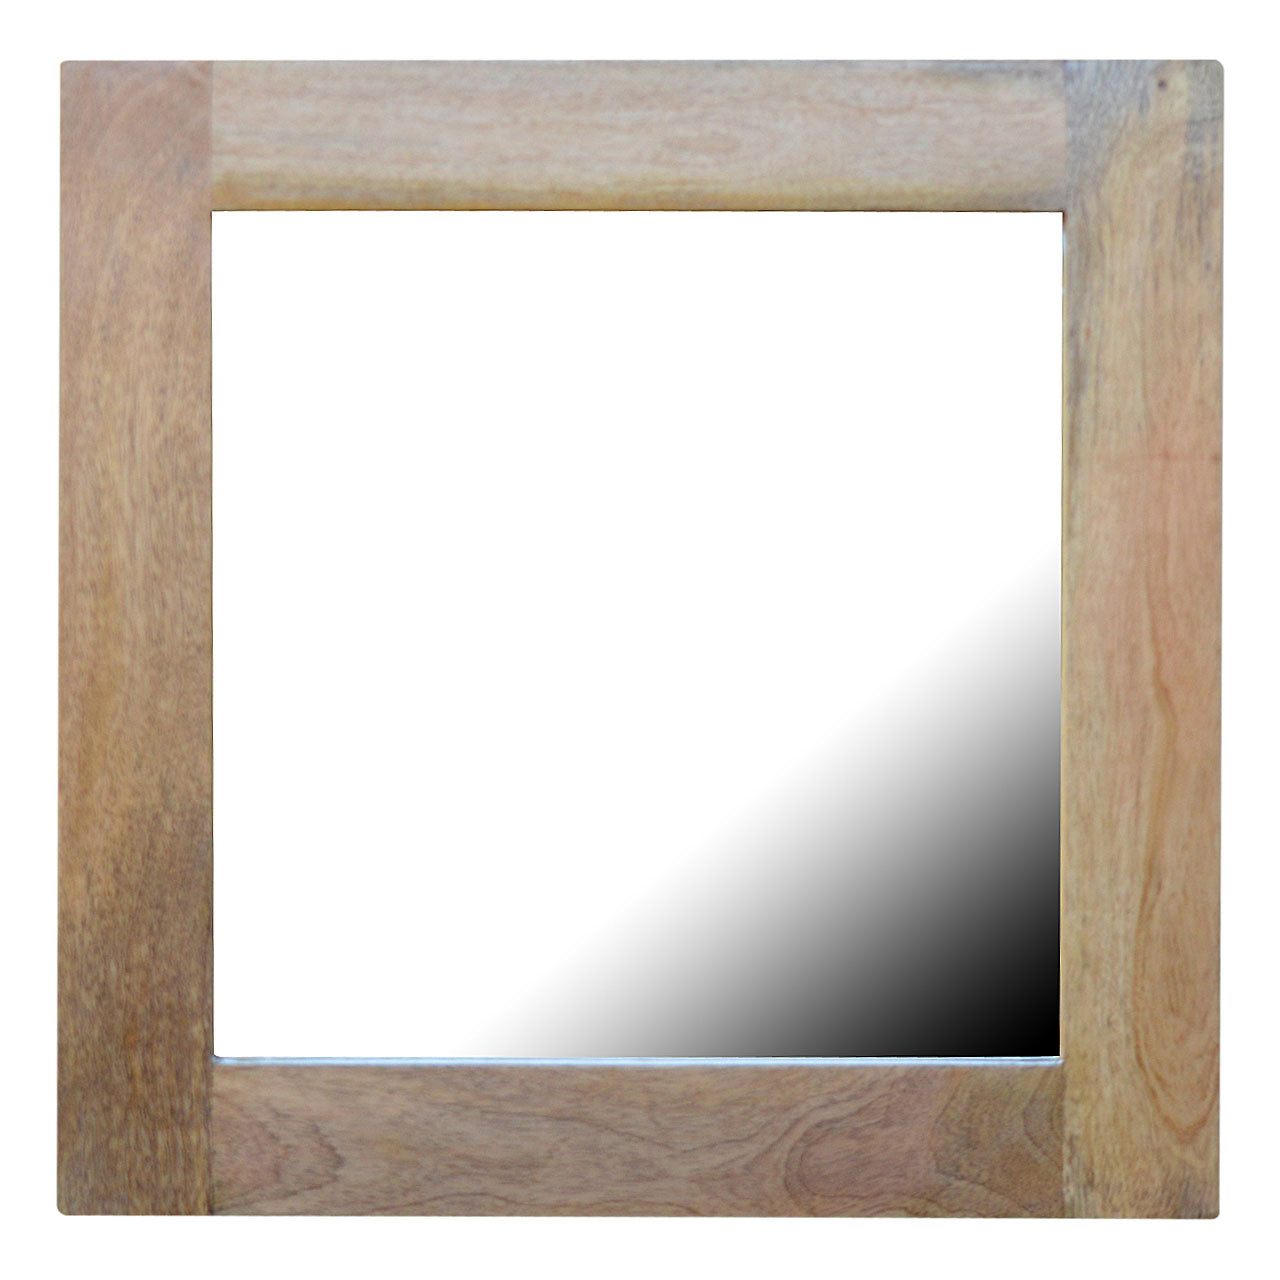 Handmade Mango Wood Square Wooden Frame With Mirror